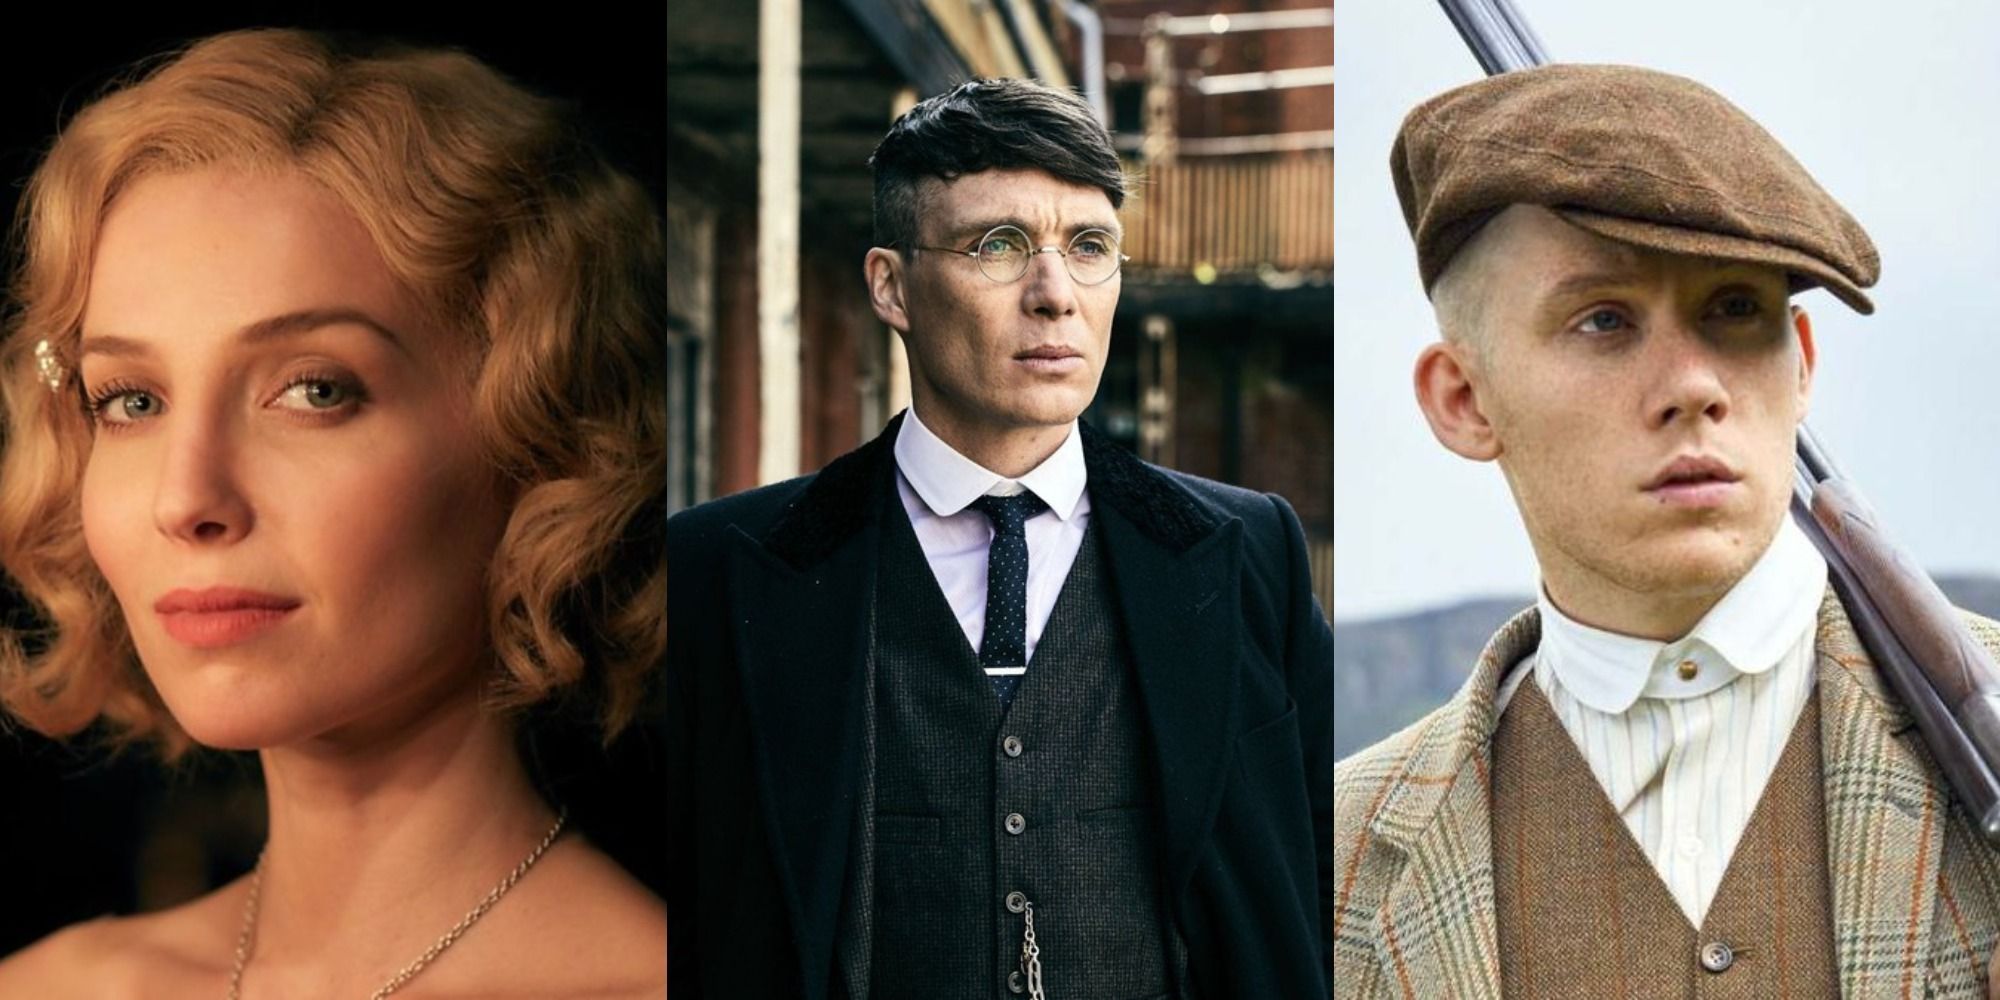 Peaky Blinders 10 Scenes That Are Hardest To Watch According To Reddit 